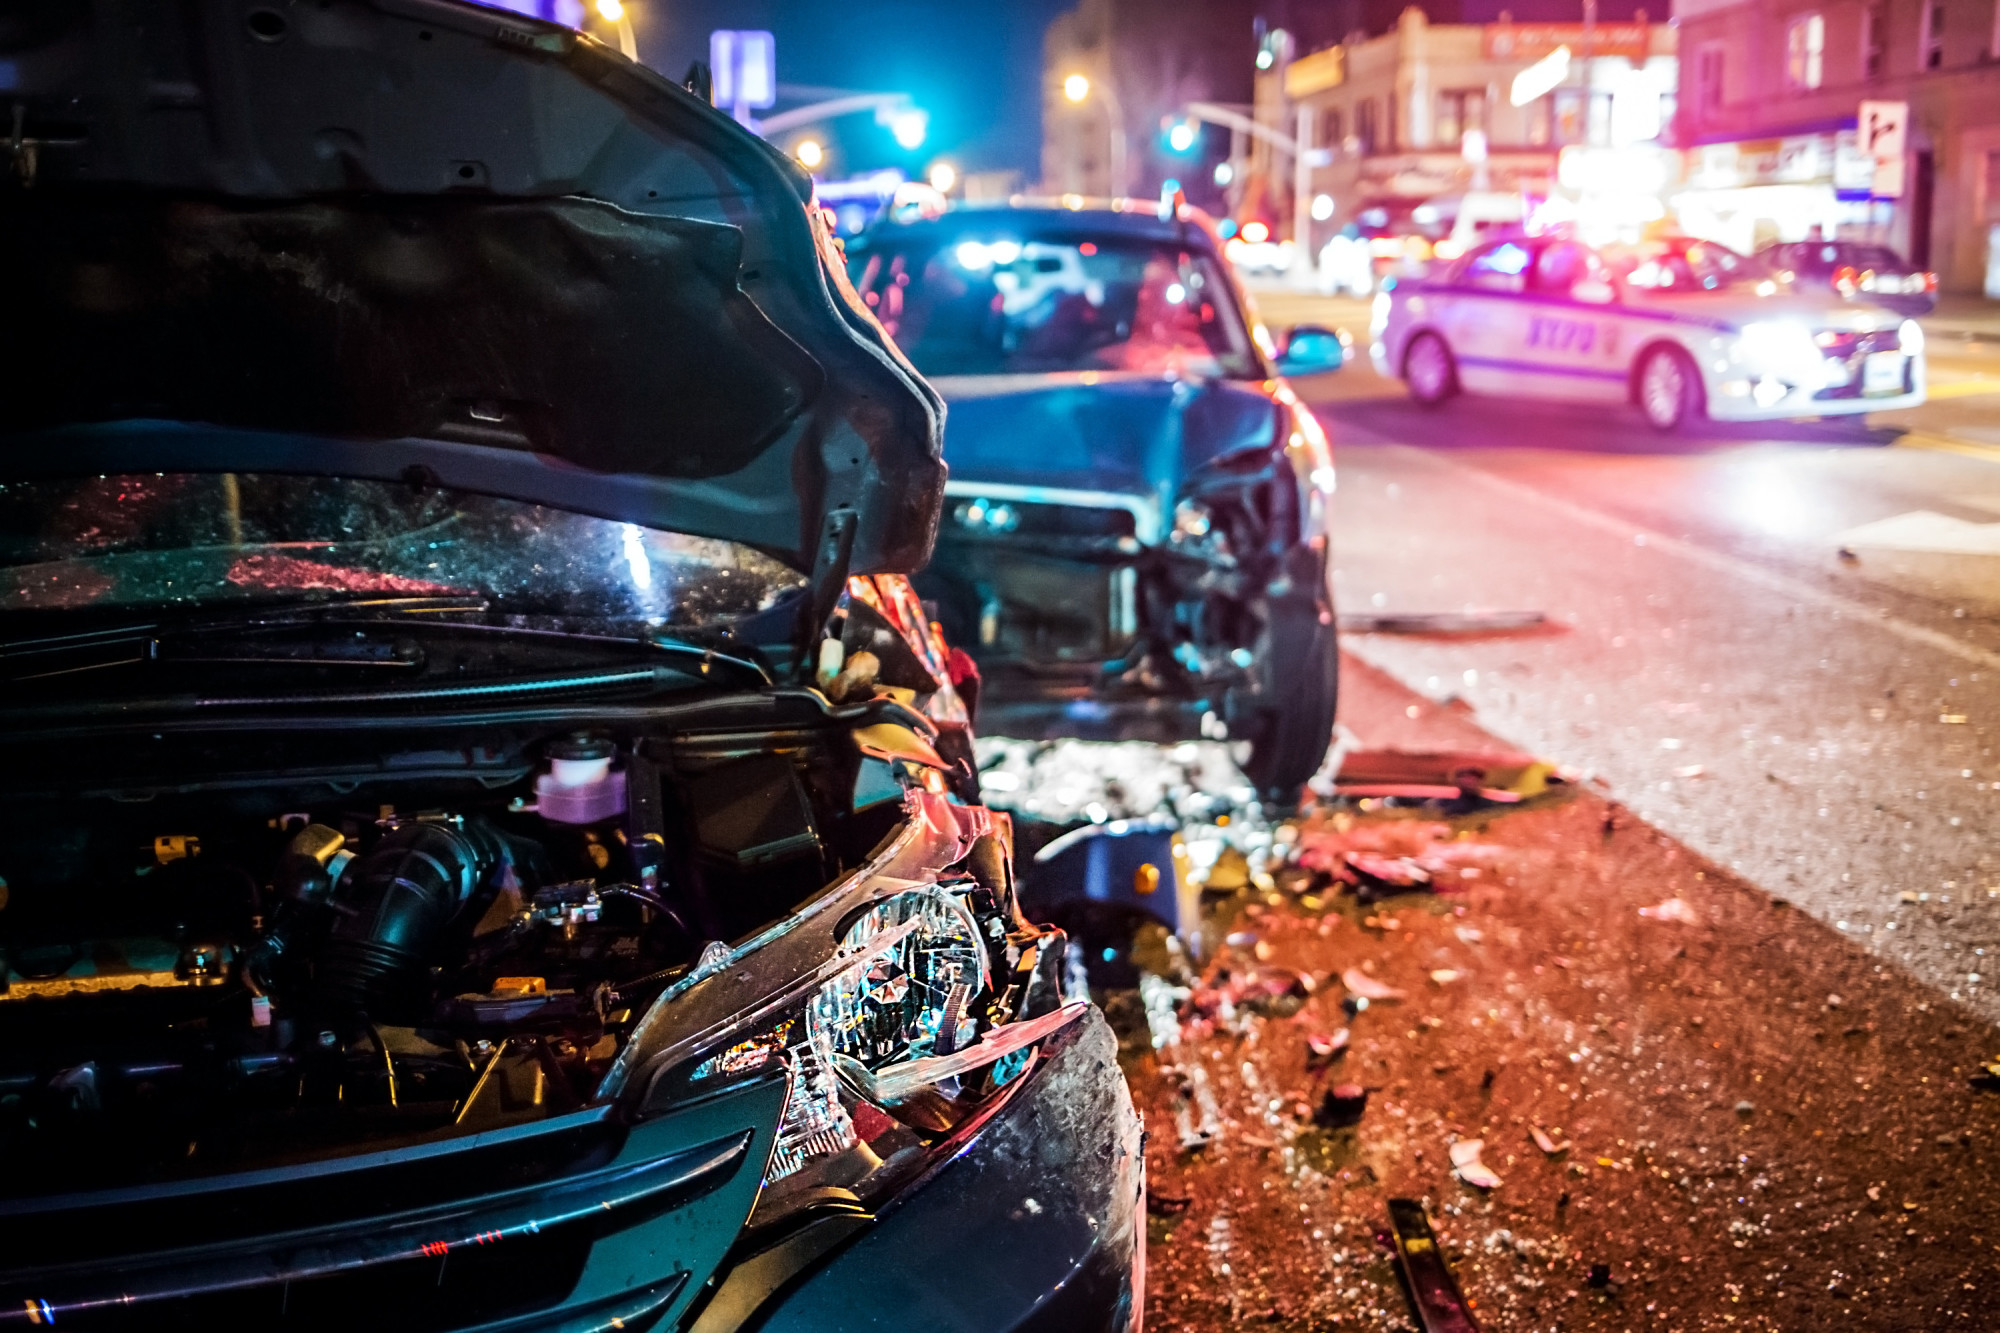 How To Prevent a Car Accident Injury During the Holidays